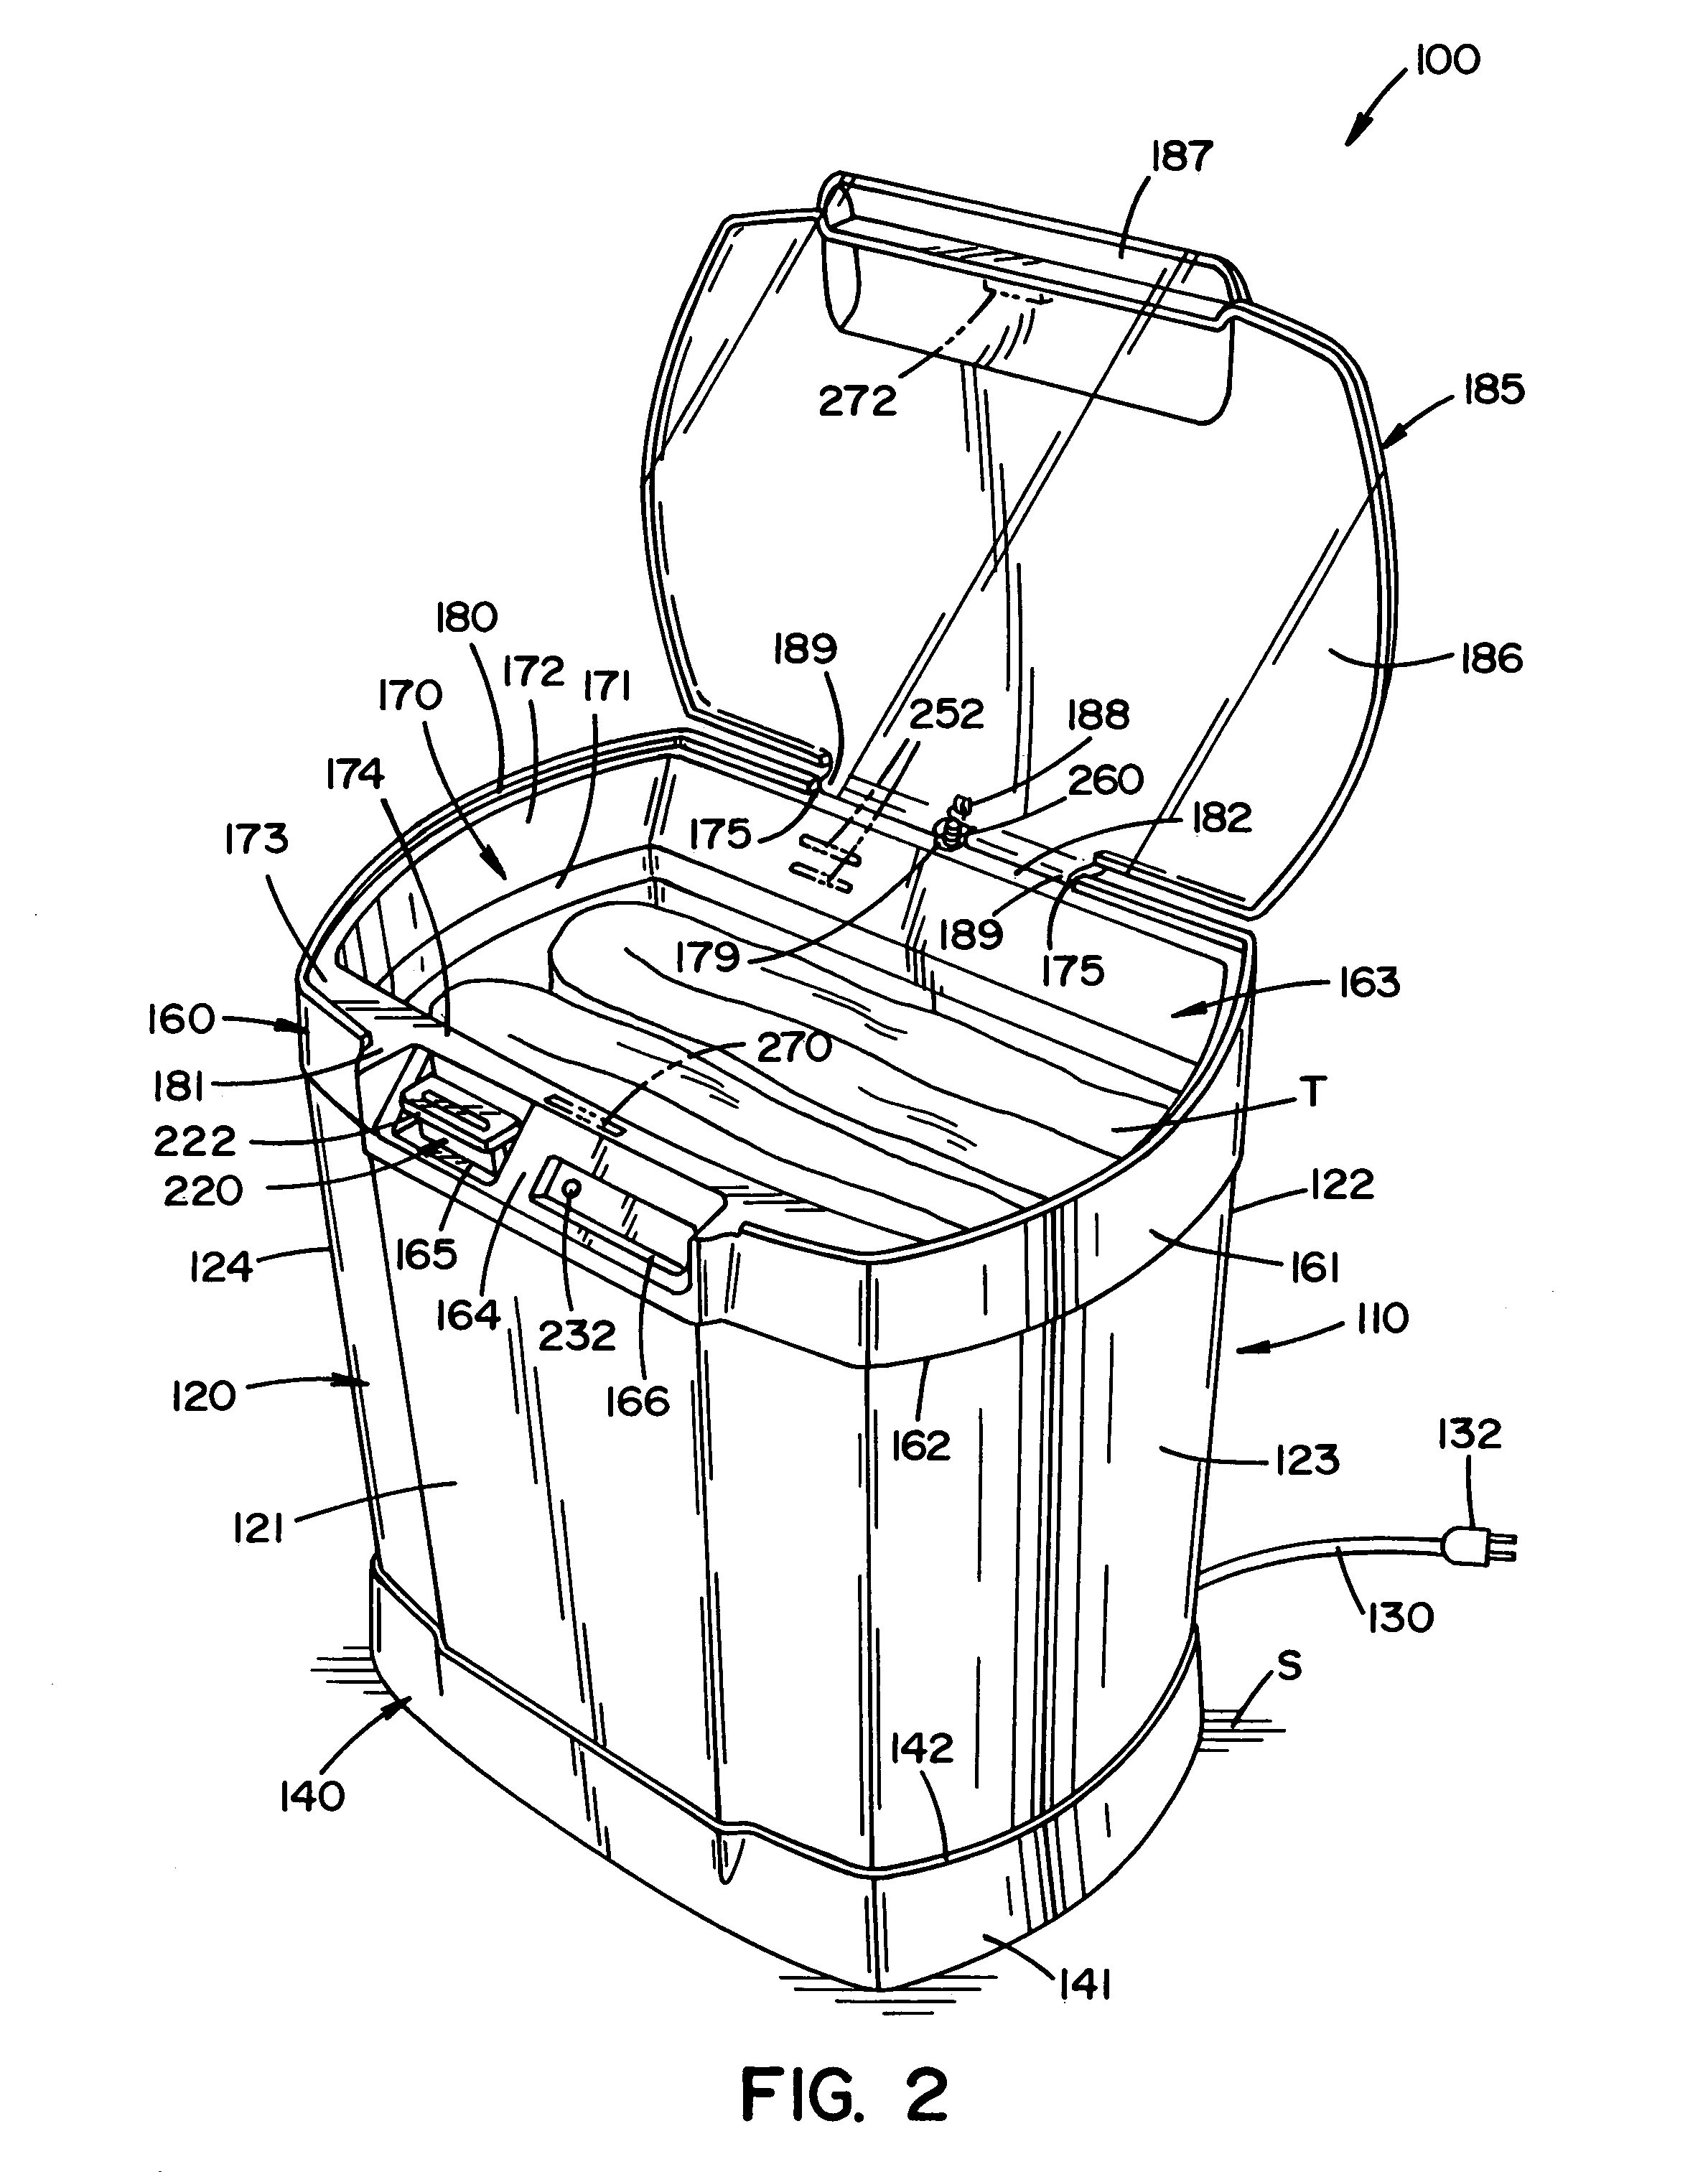 Portable warming device and method for warming an article